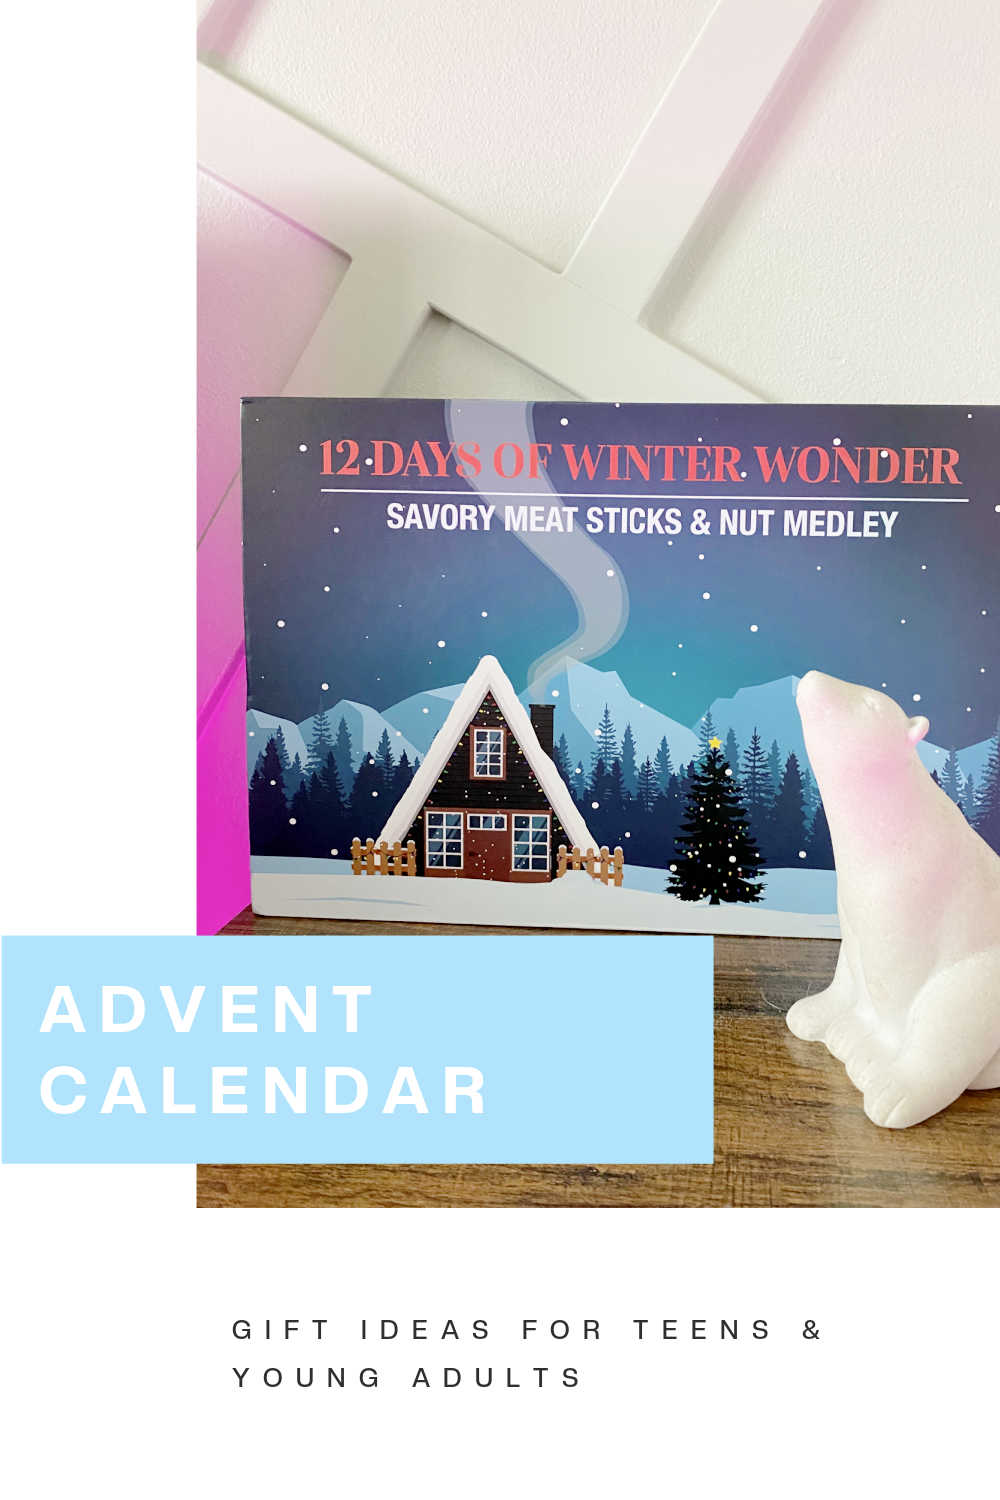 ADVENT CALENDAR FOR TEENS AND YOUNG ADULTS